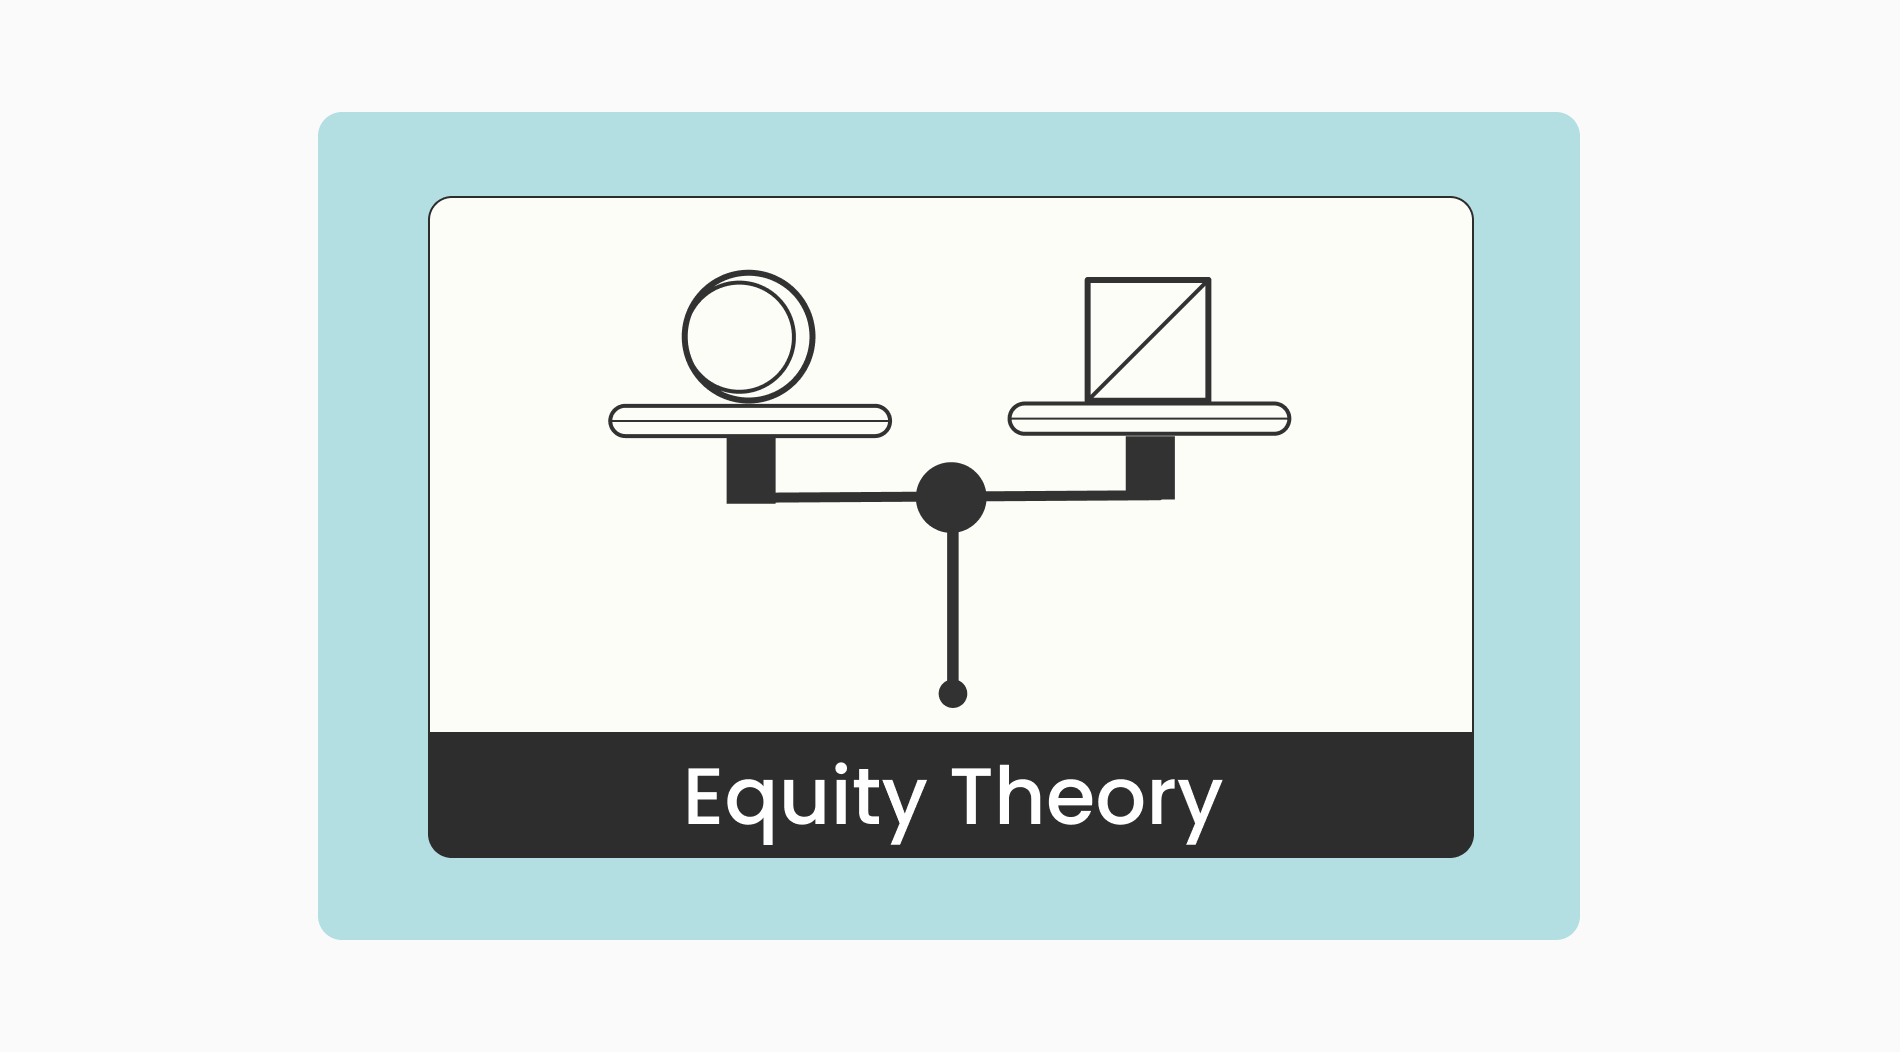 Equity theory: Definition, how to use it & benefits